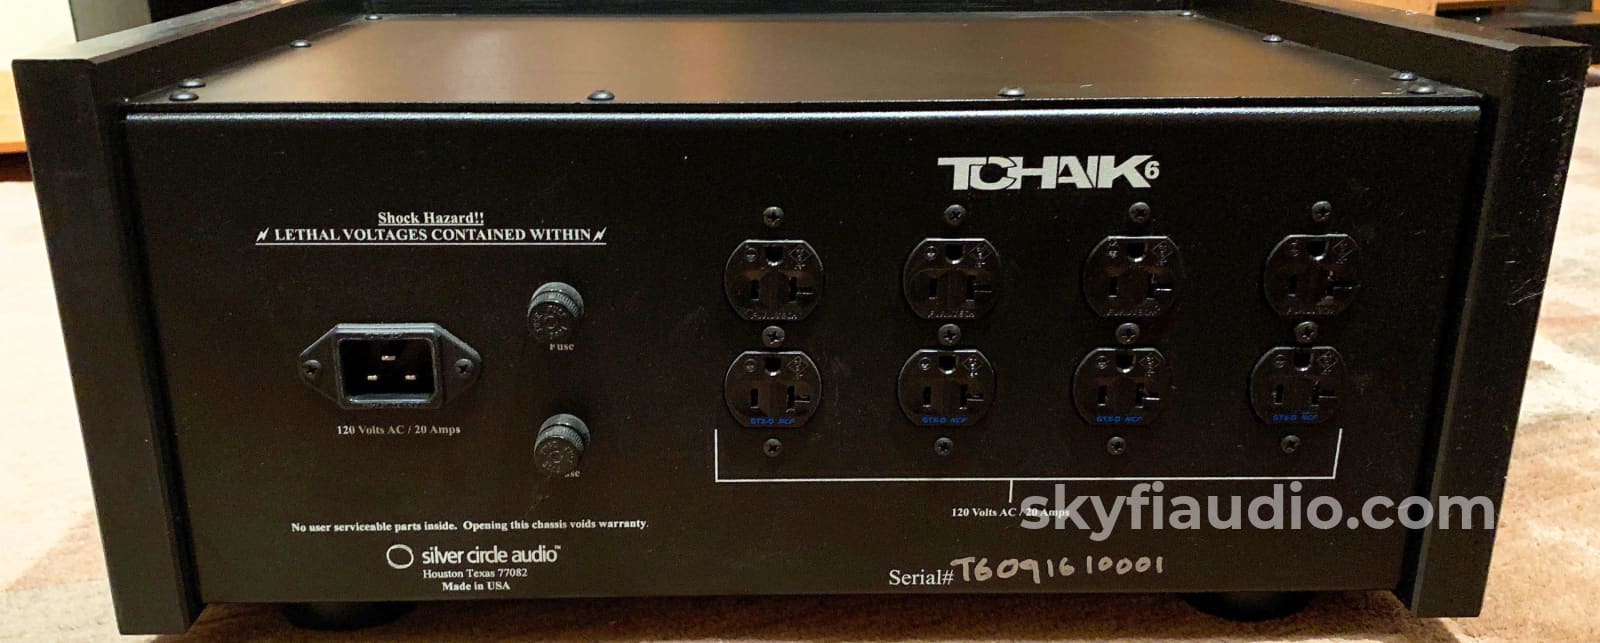 Silver Circle Audio Tchaik 6 Power Conditioner - Highly Reviewed